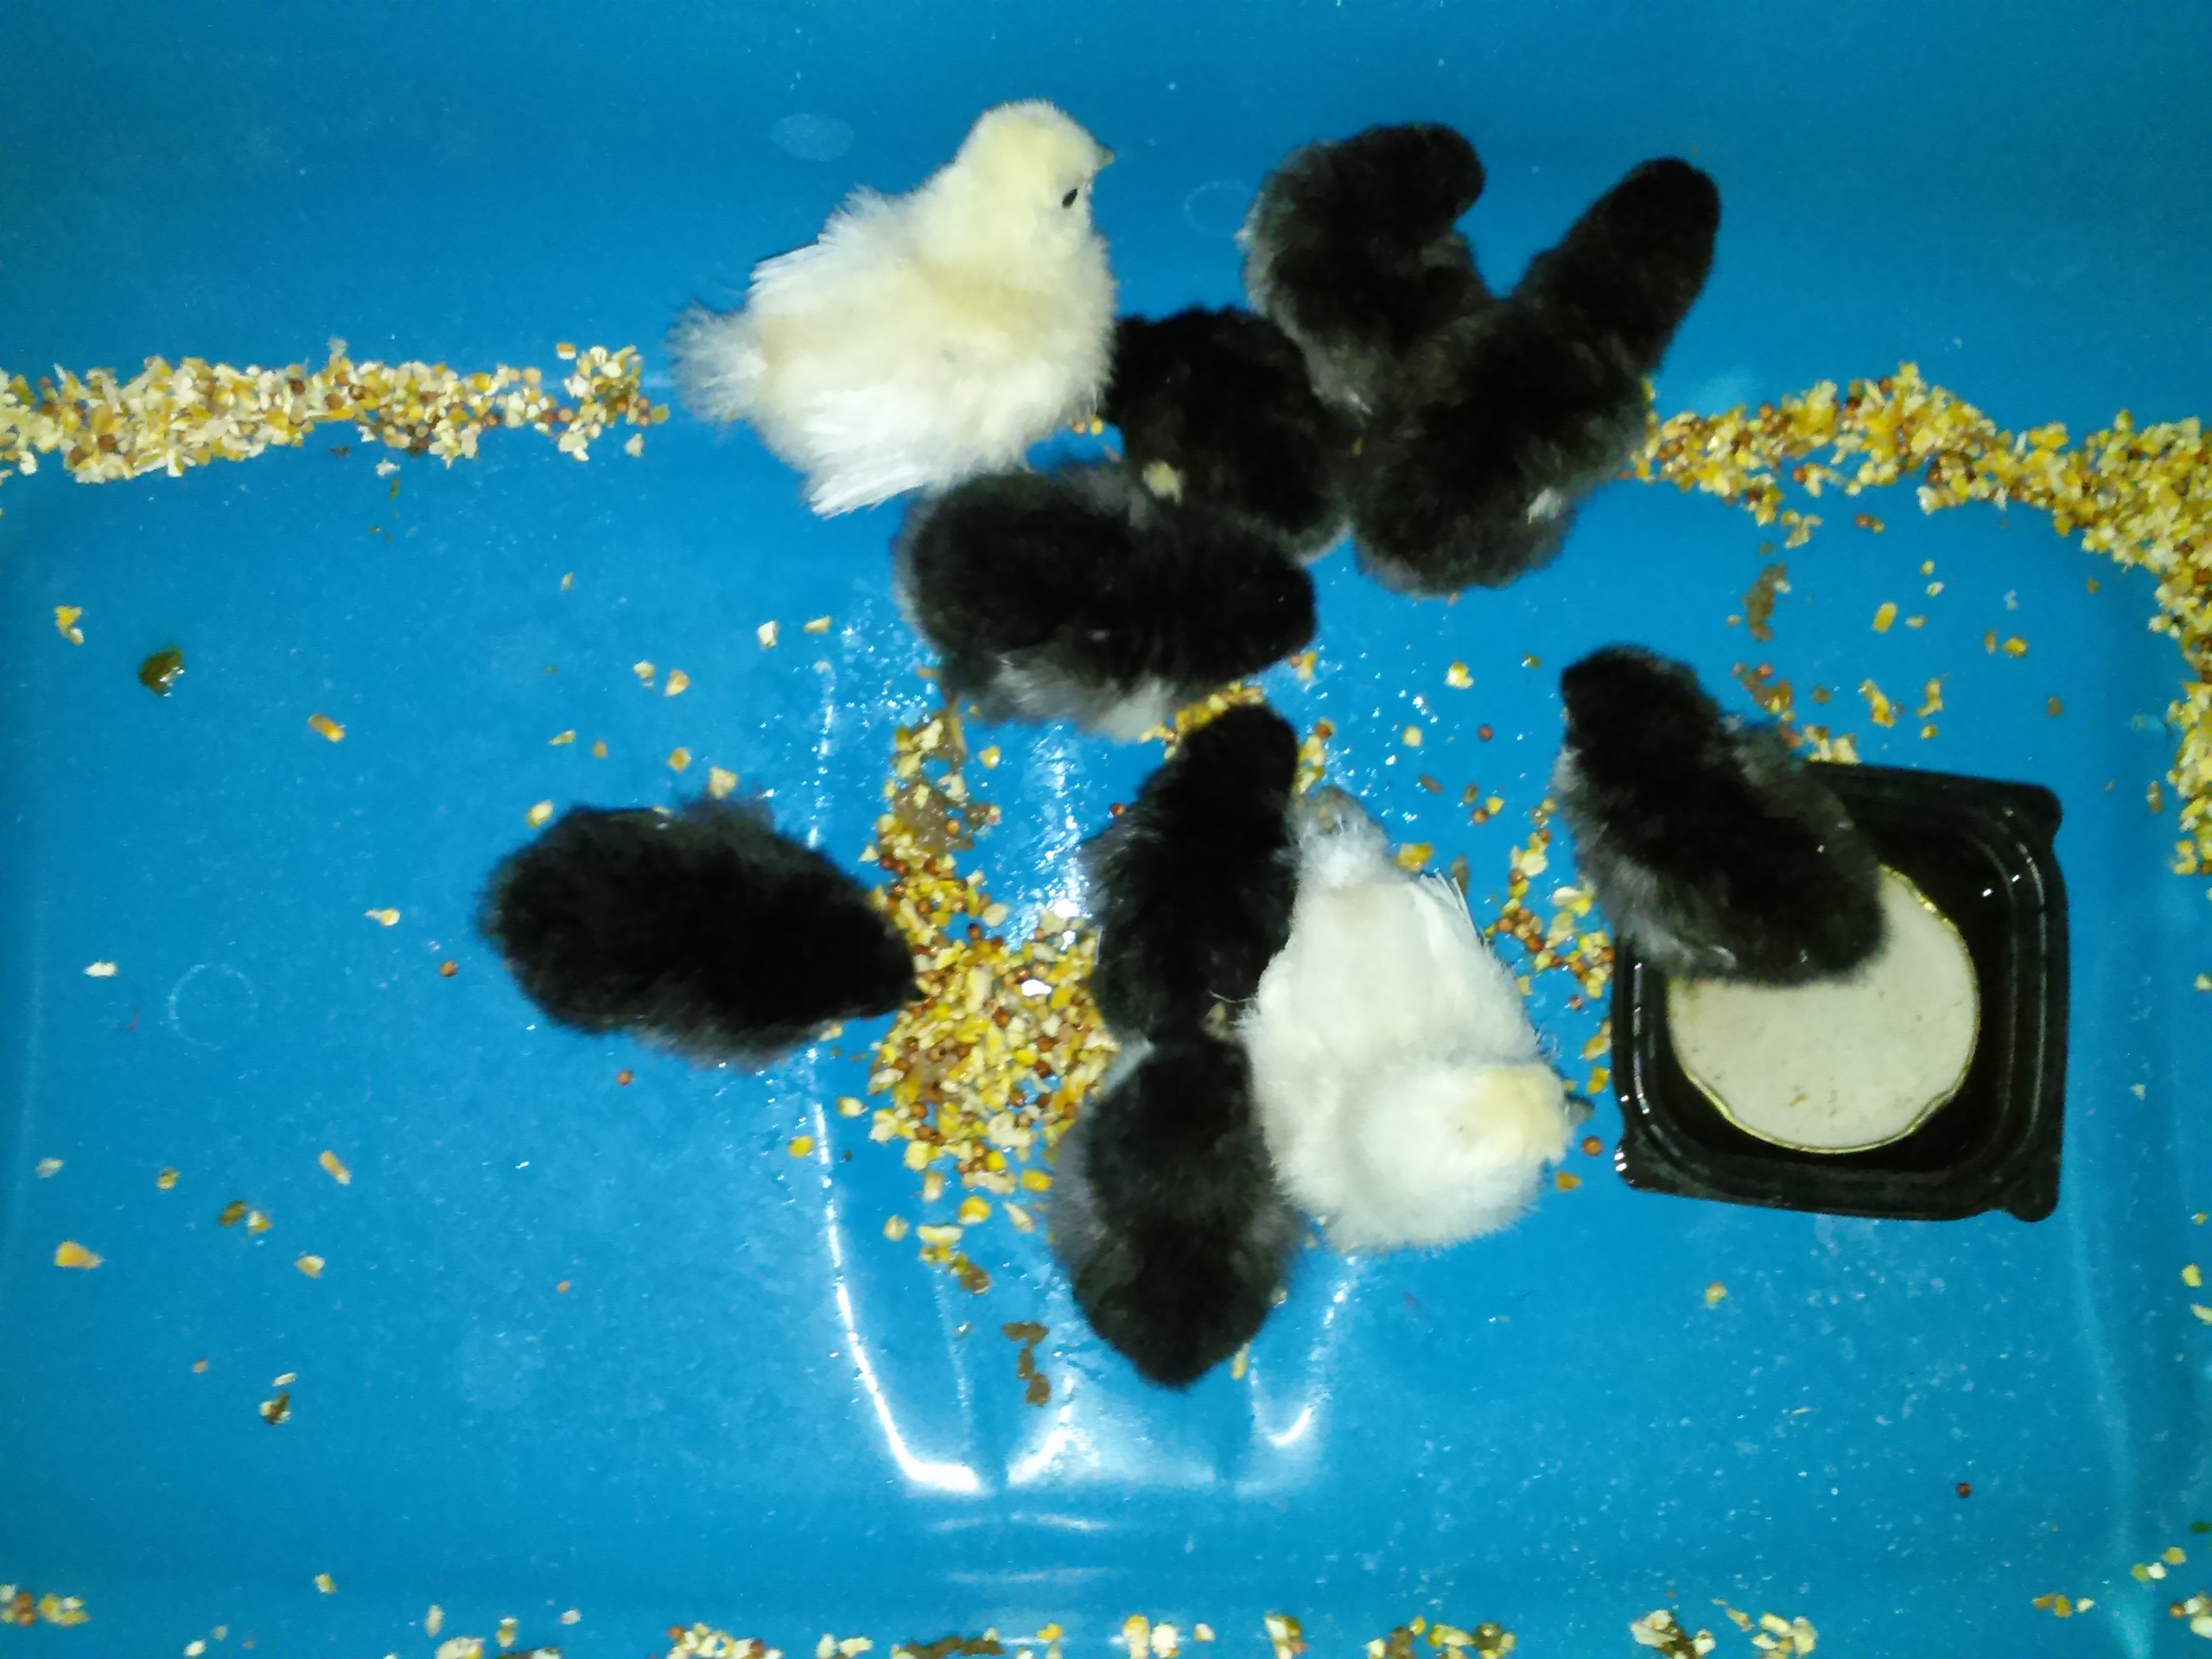 8 Jersey Giants @ 4days old and 2 Silkie Bantams(age unknown).